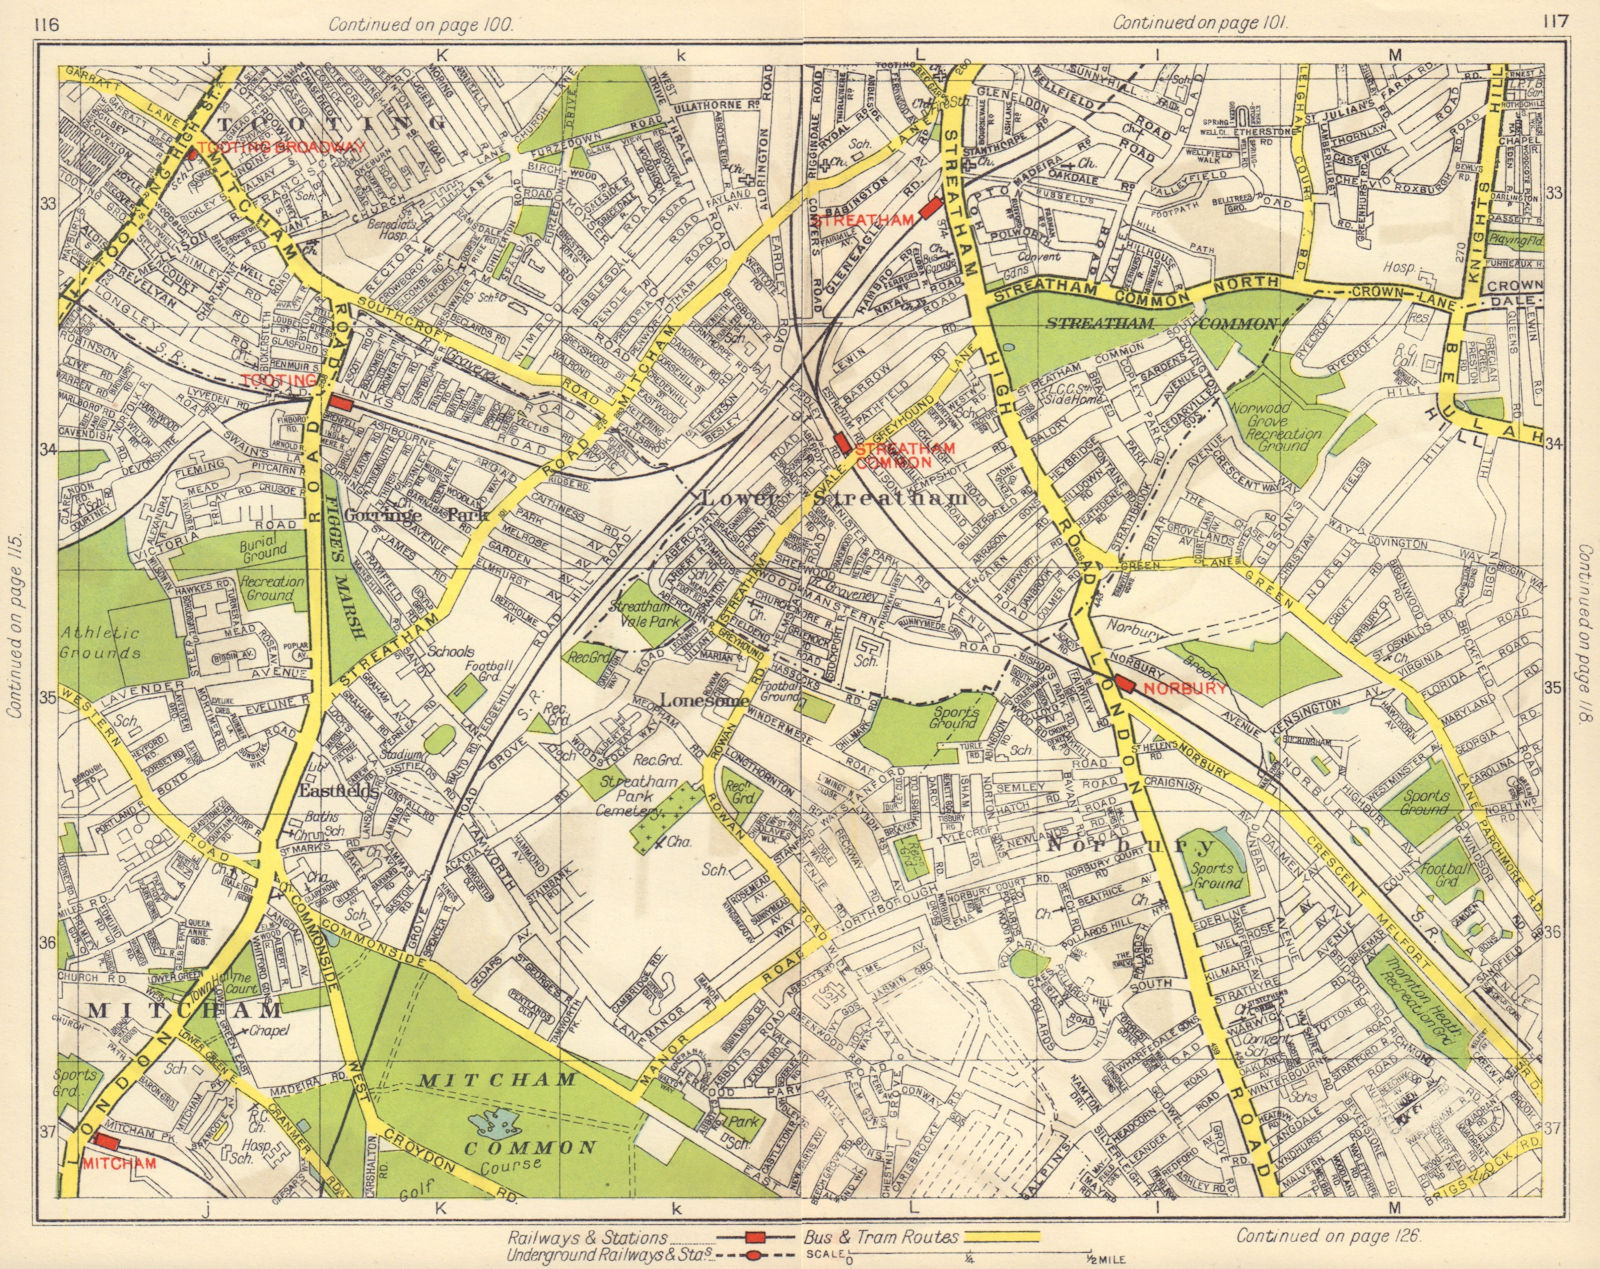 S LONDON. Mitcham Tooting Streatham West Norwood Norbury Eastfields 1948 map